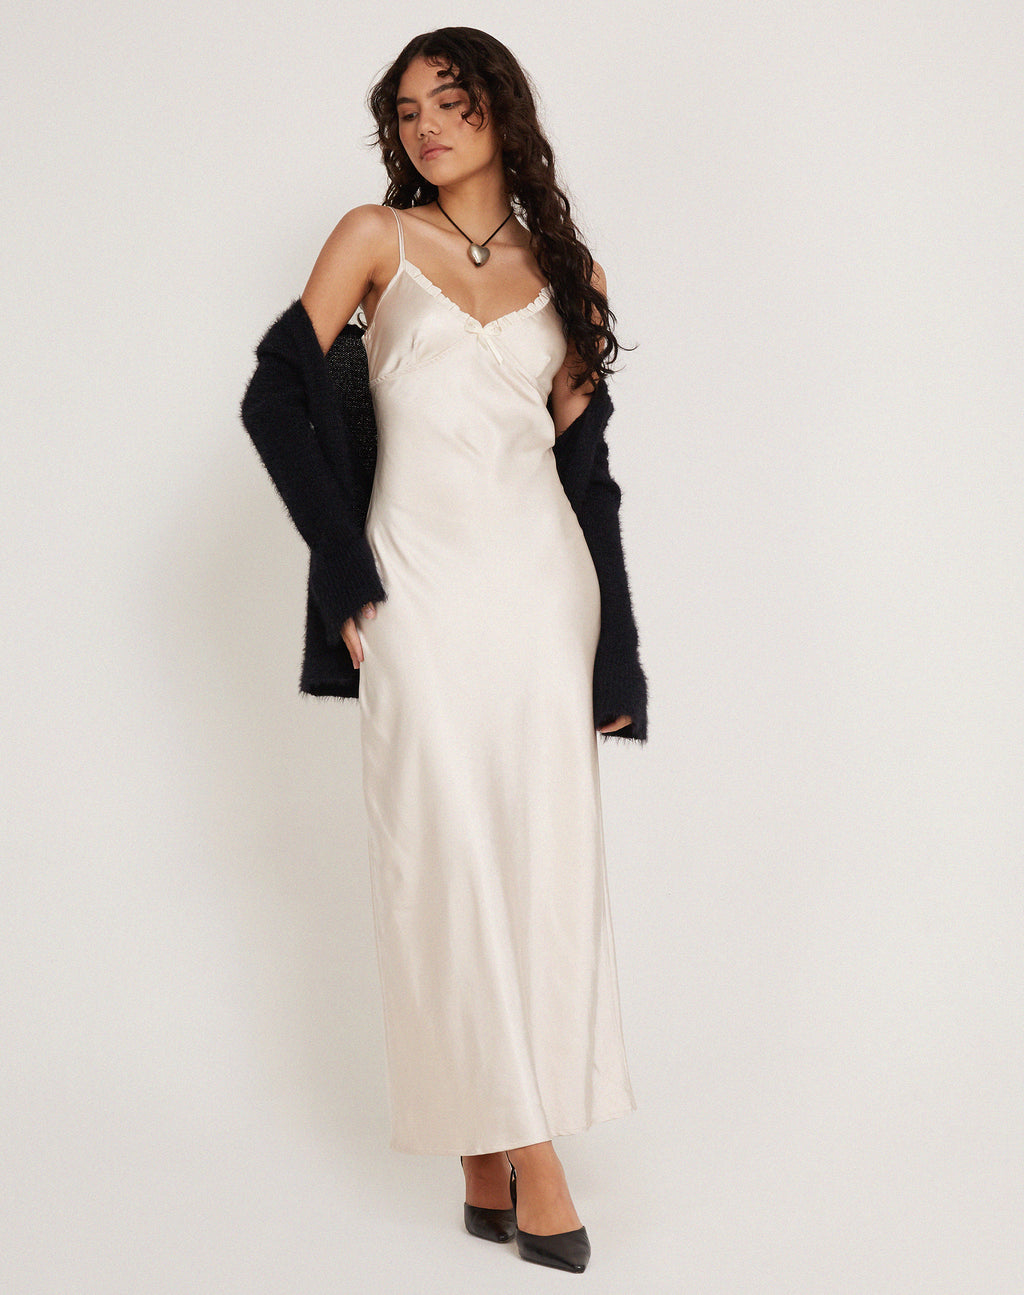 Sheer Jersey White Backless Maxi Dress